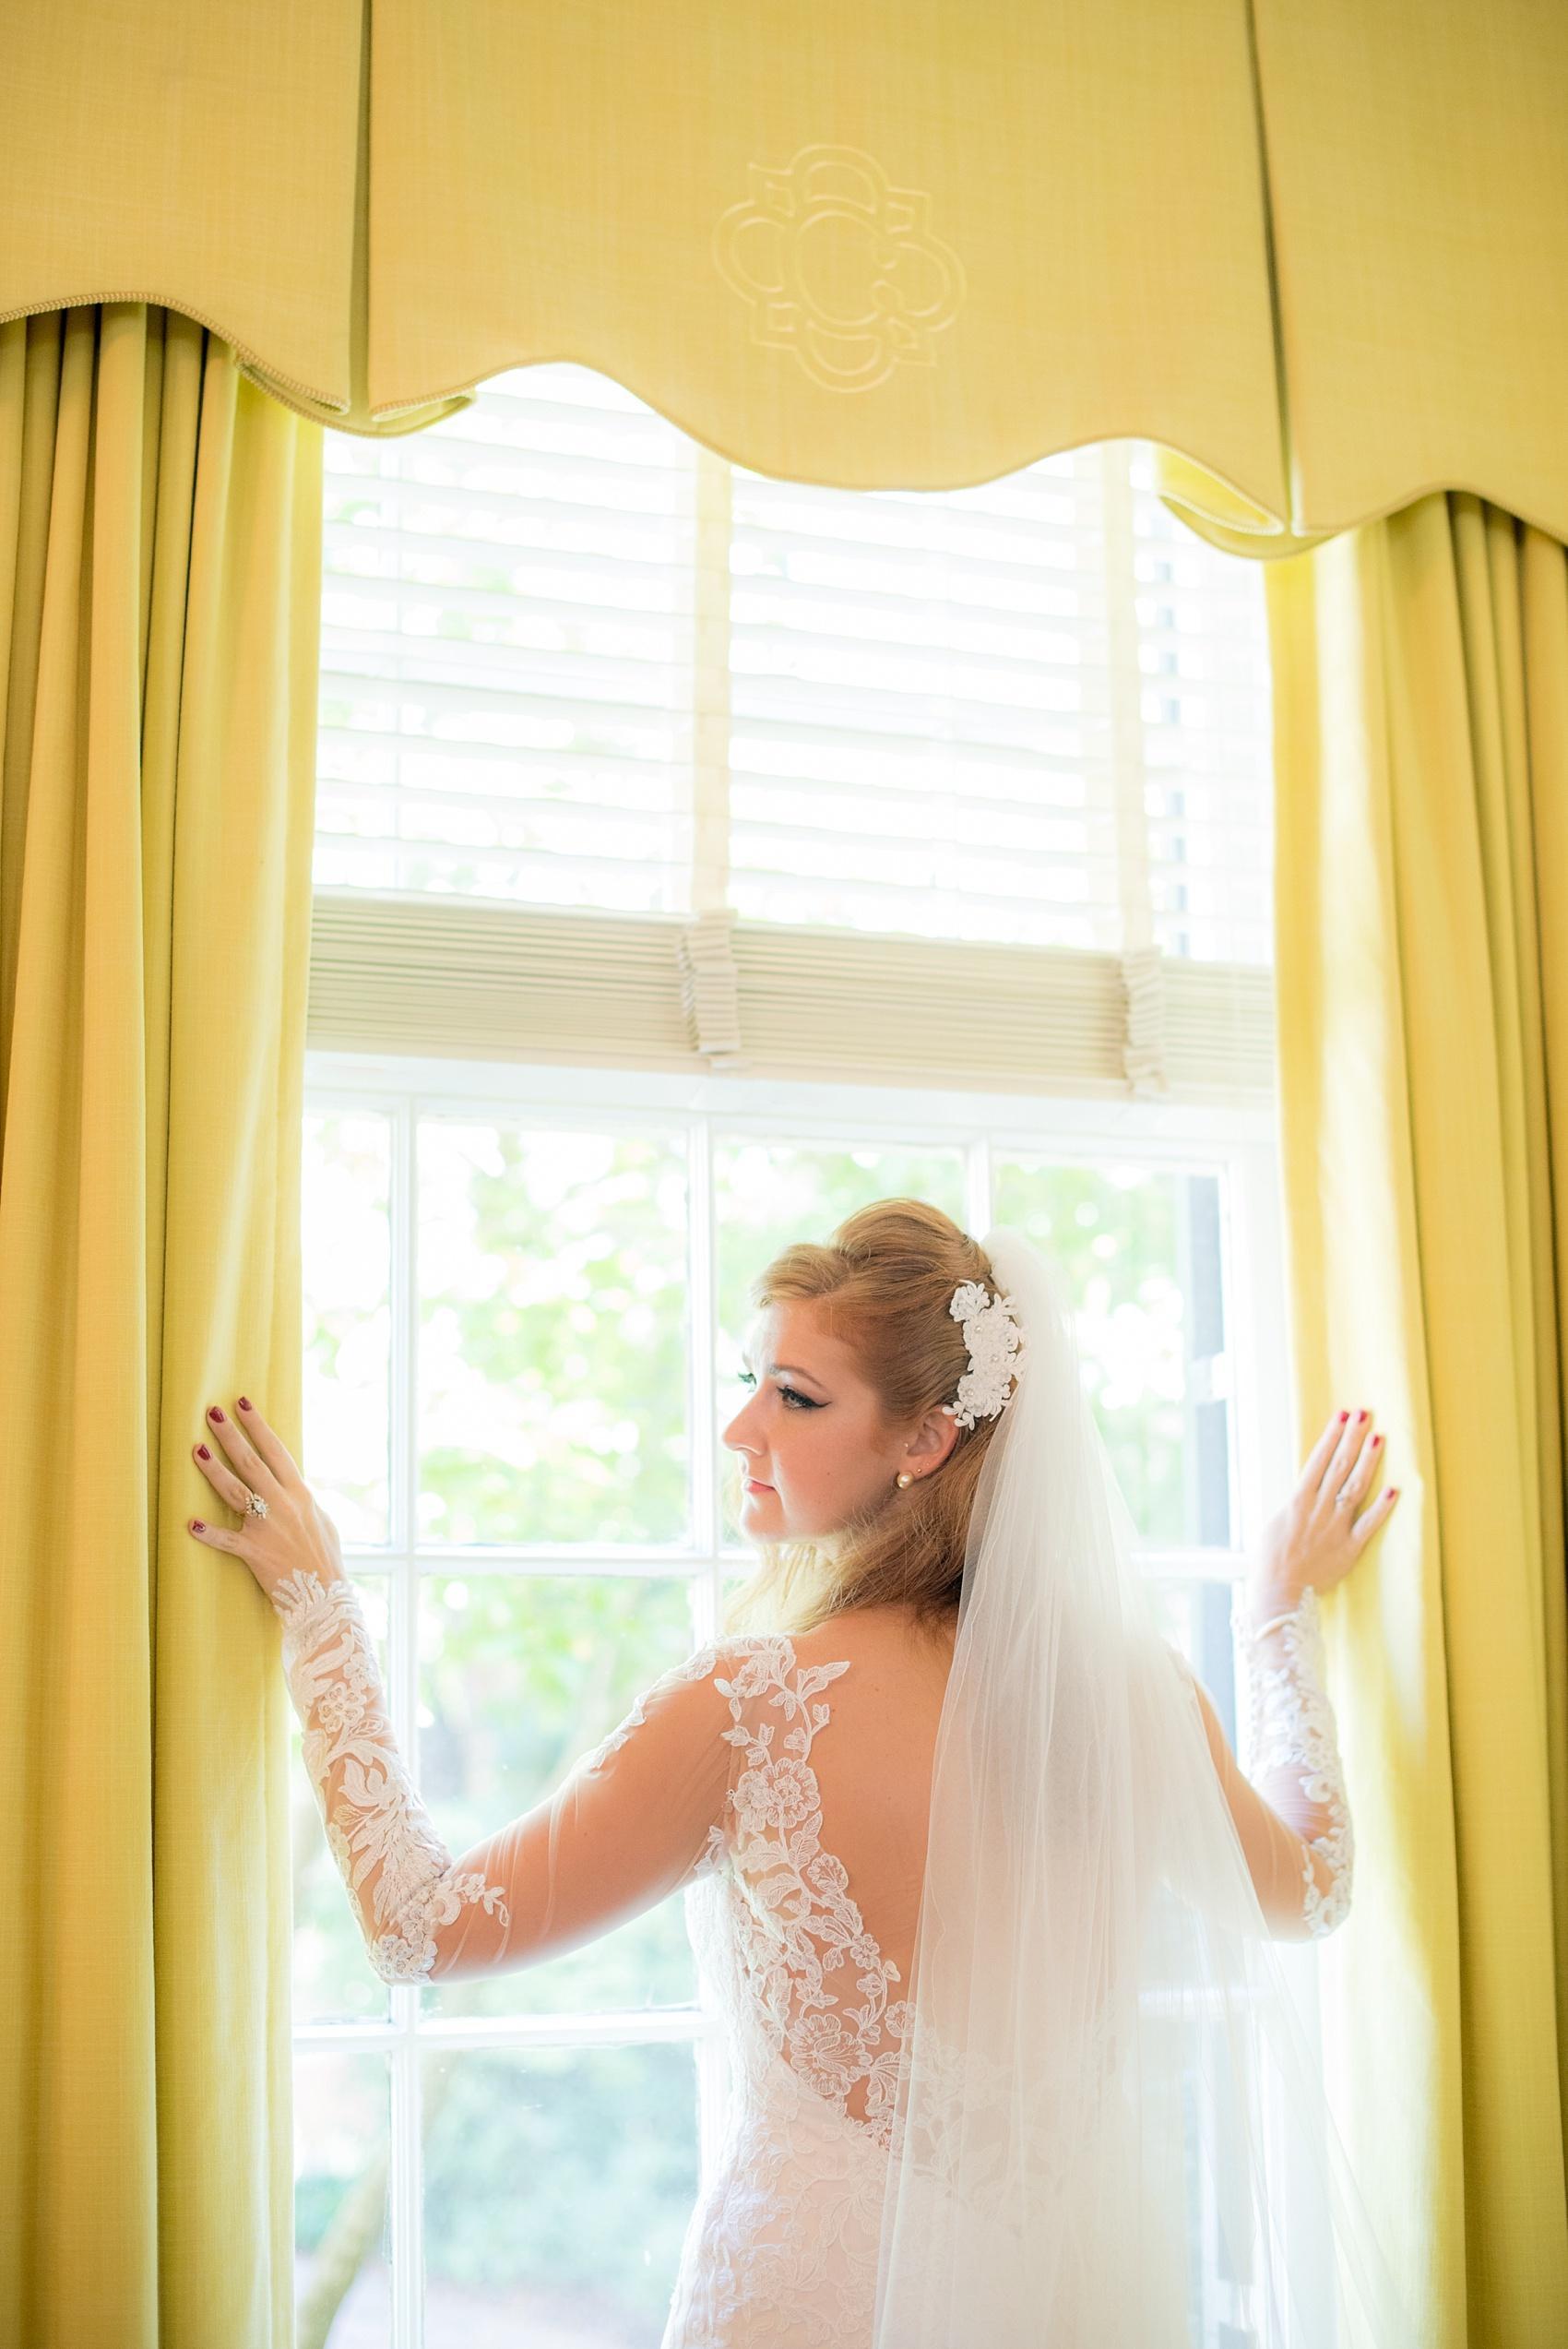 The Carolina Inn bridal portraits by Raleigh wedding photographer Mikkel Paige Photography. The bride in a white lace gown with lush yellow curtains.